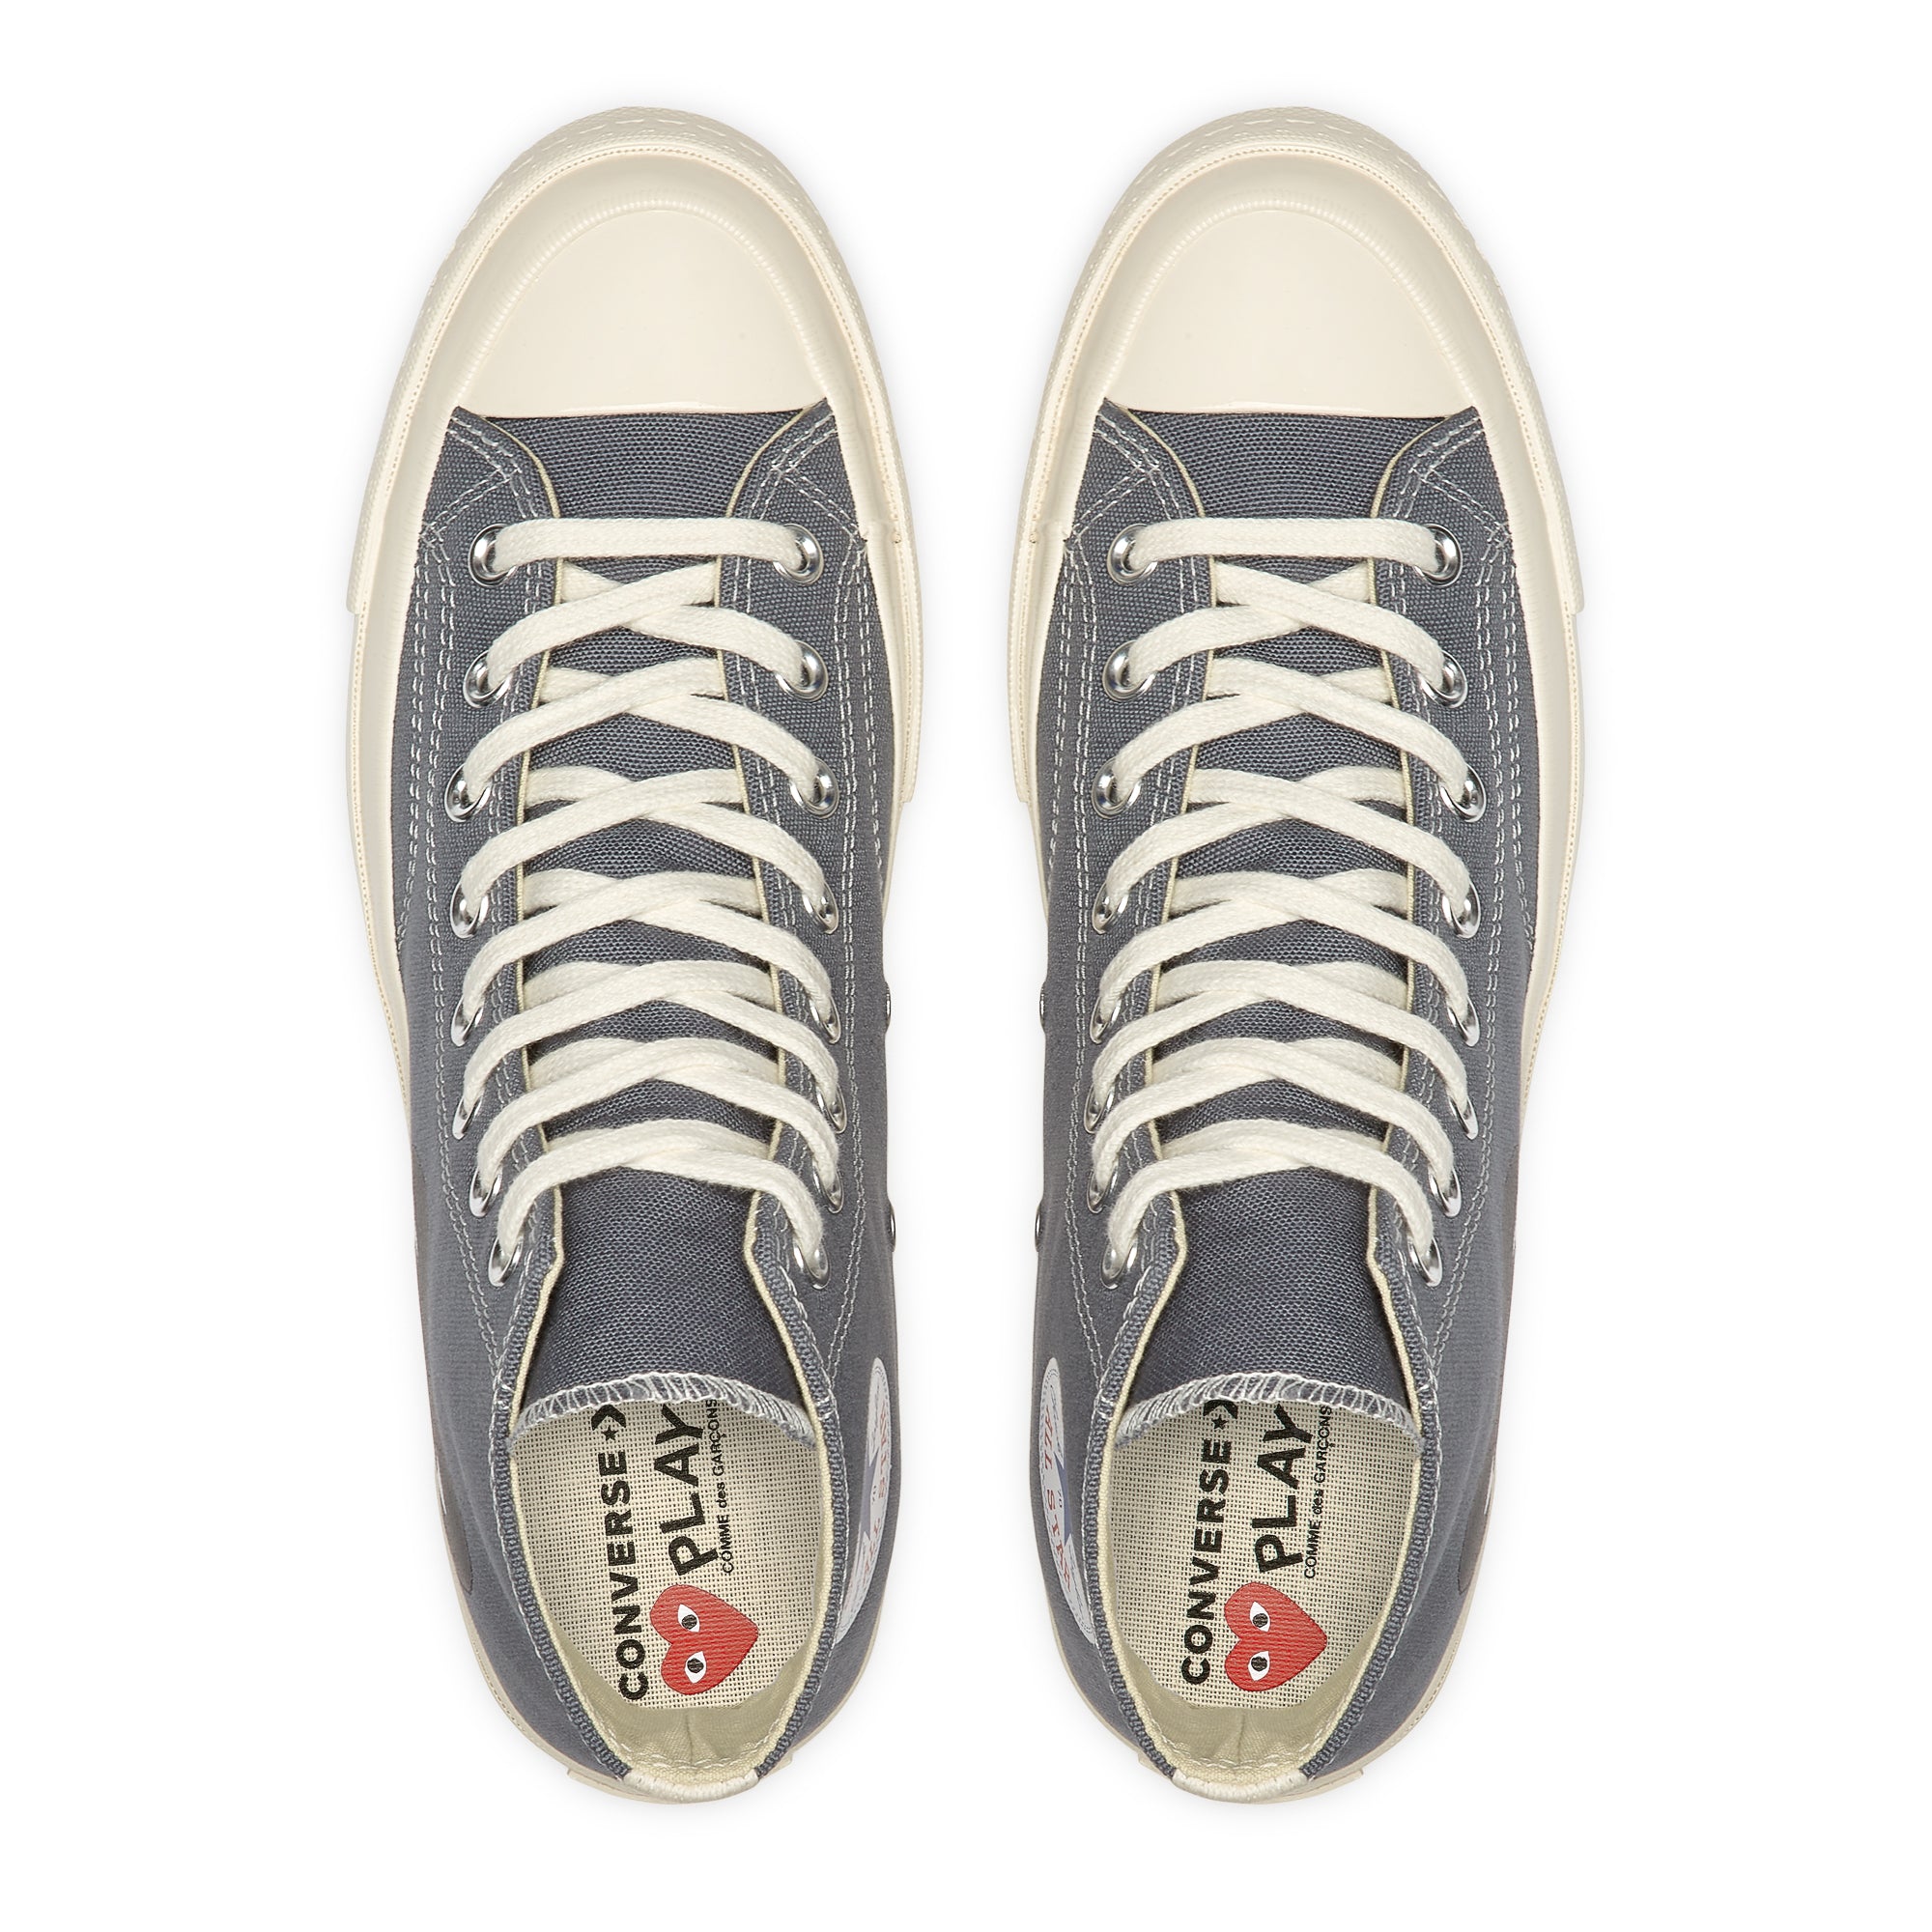 Play Converse - Black Heart Chuck Taylor All Star ’70 High Sneakers - (Grey) view 5